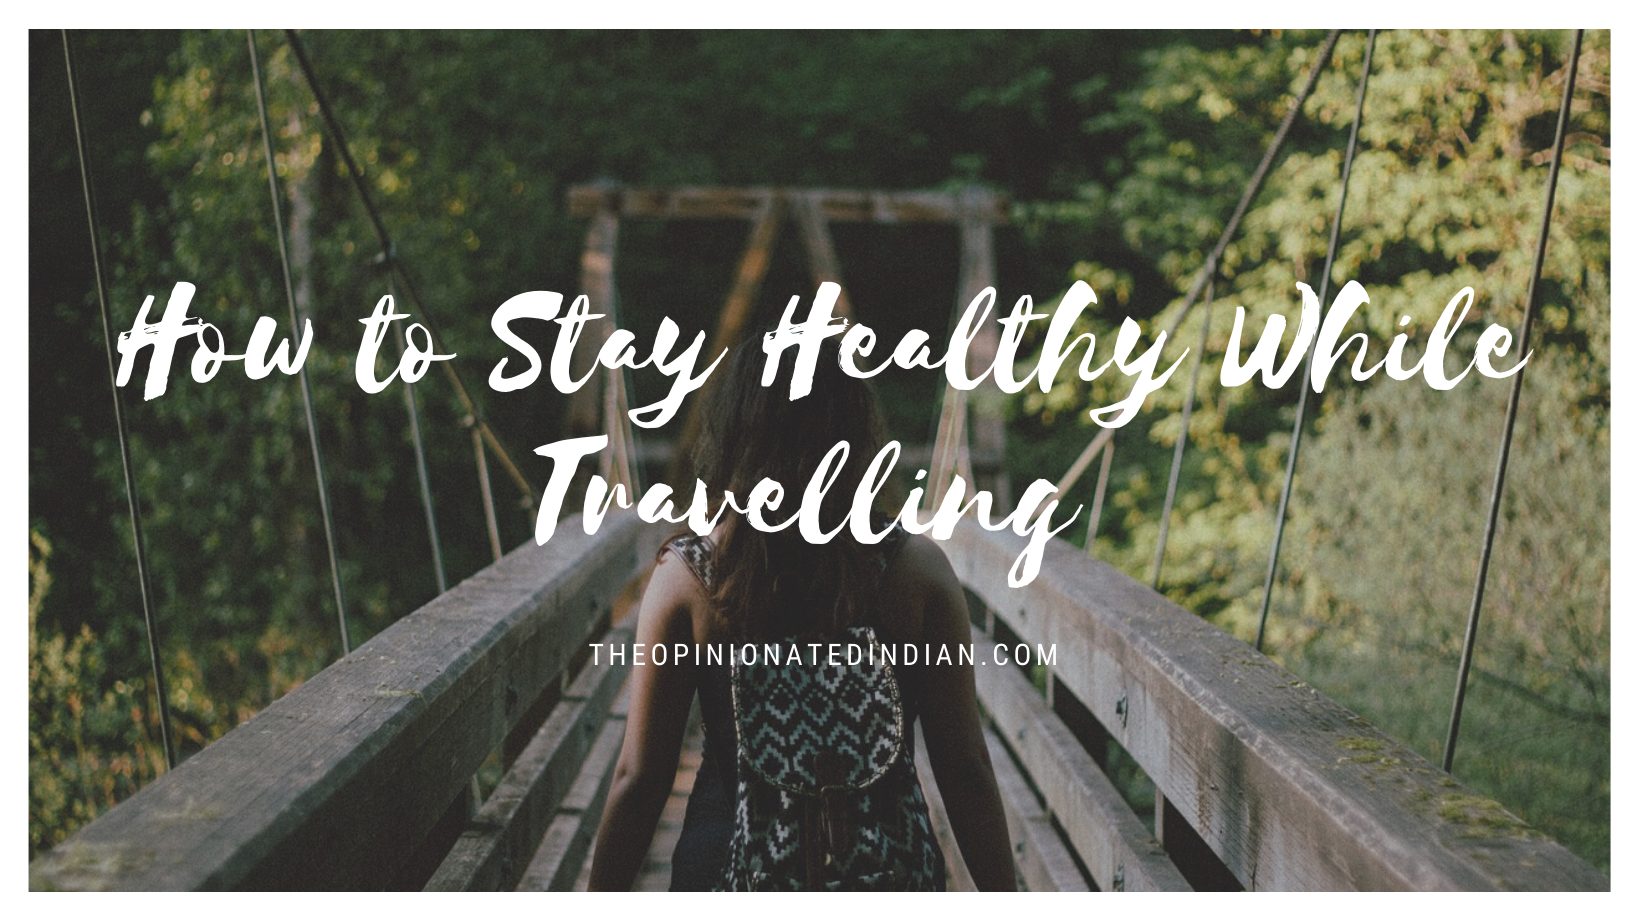 How to Stay Healthy While Travelling